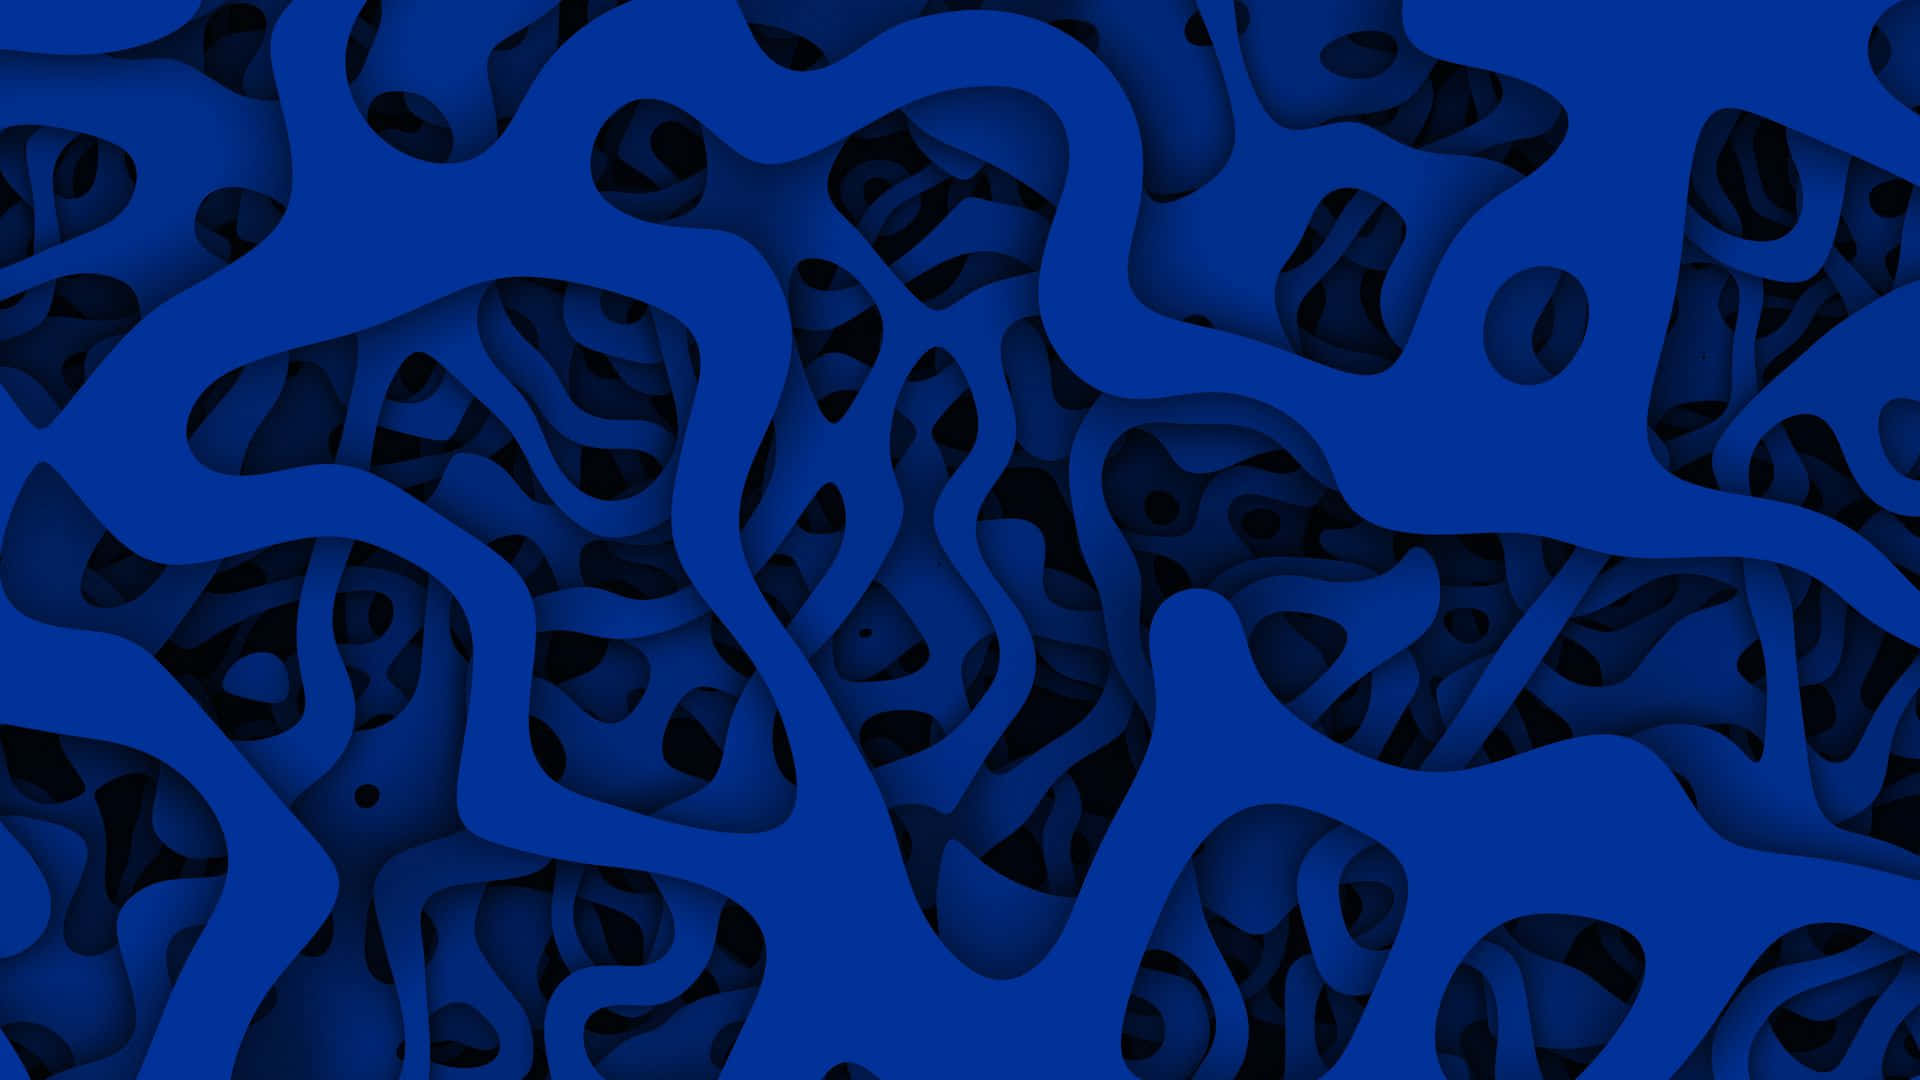 Abstract Squiggly Patterns Blue PC Wallpaper